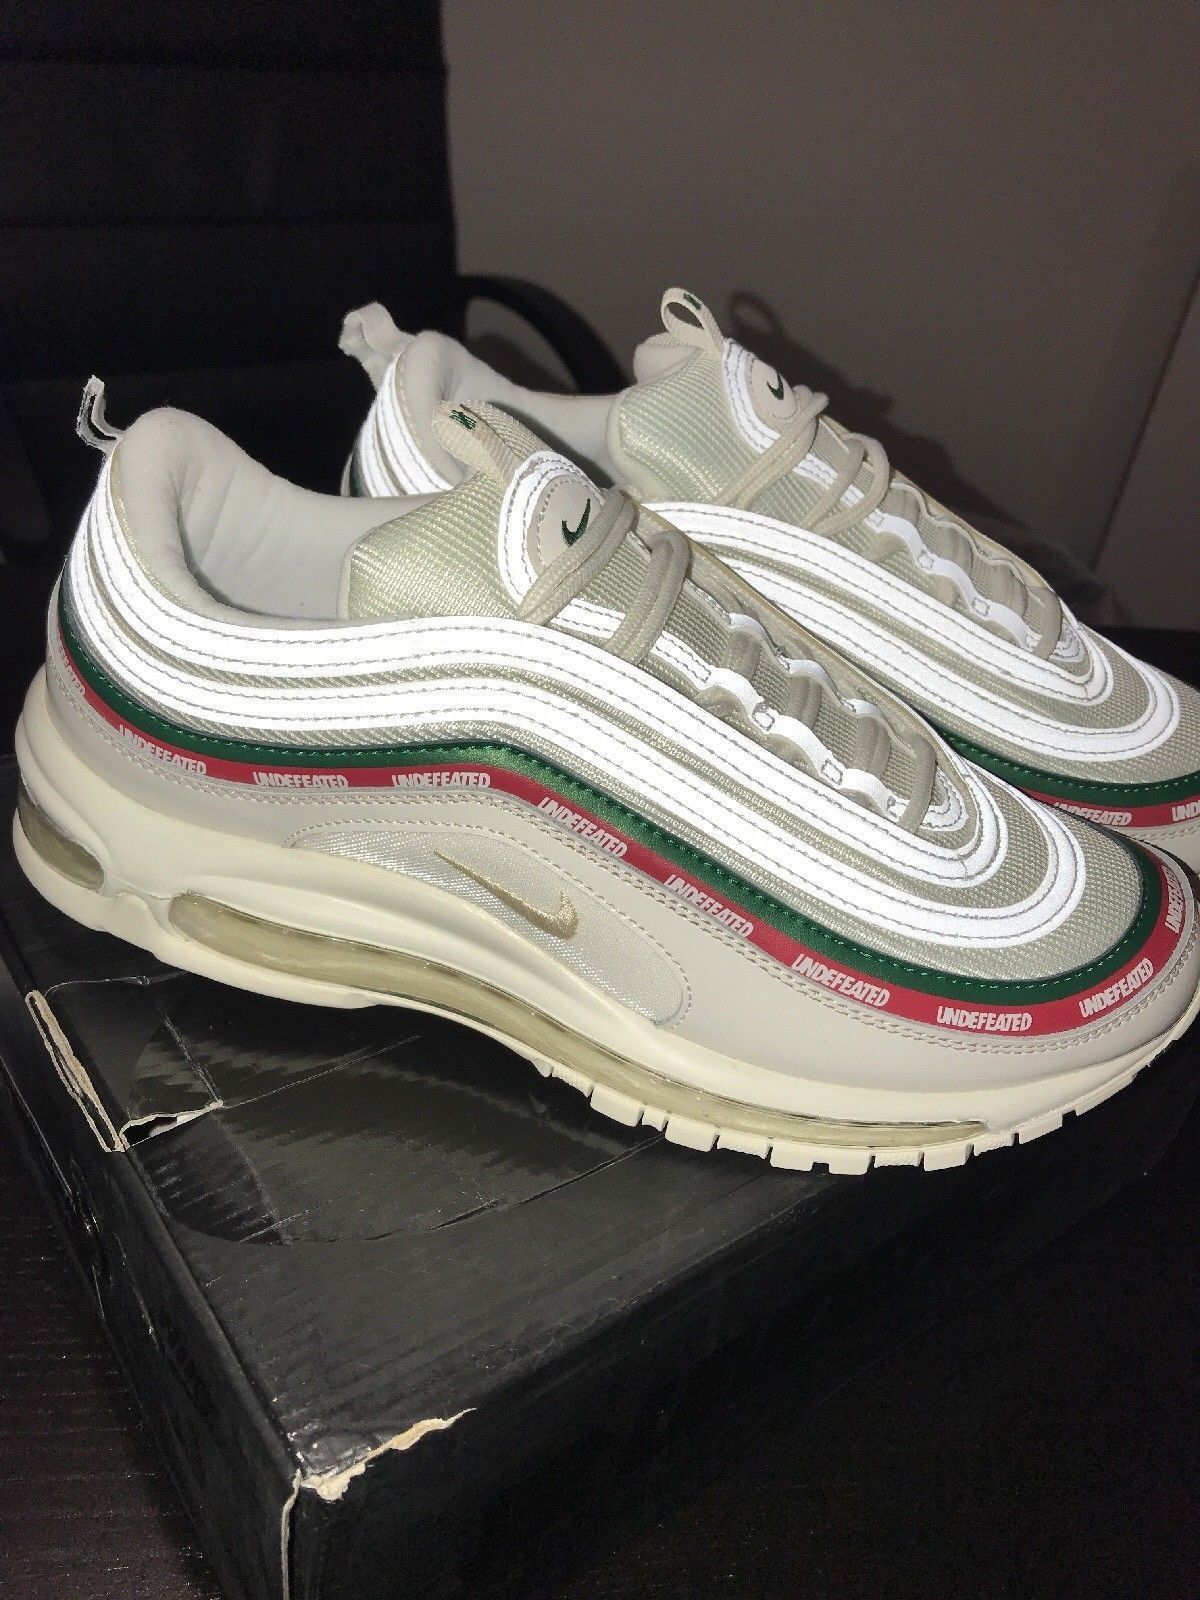 Nike Undefeated Air Max 97 White Green Gucci Colorway | Grailed